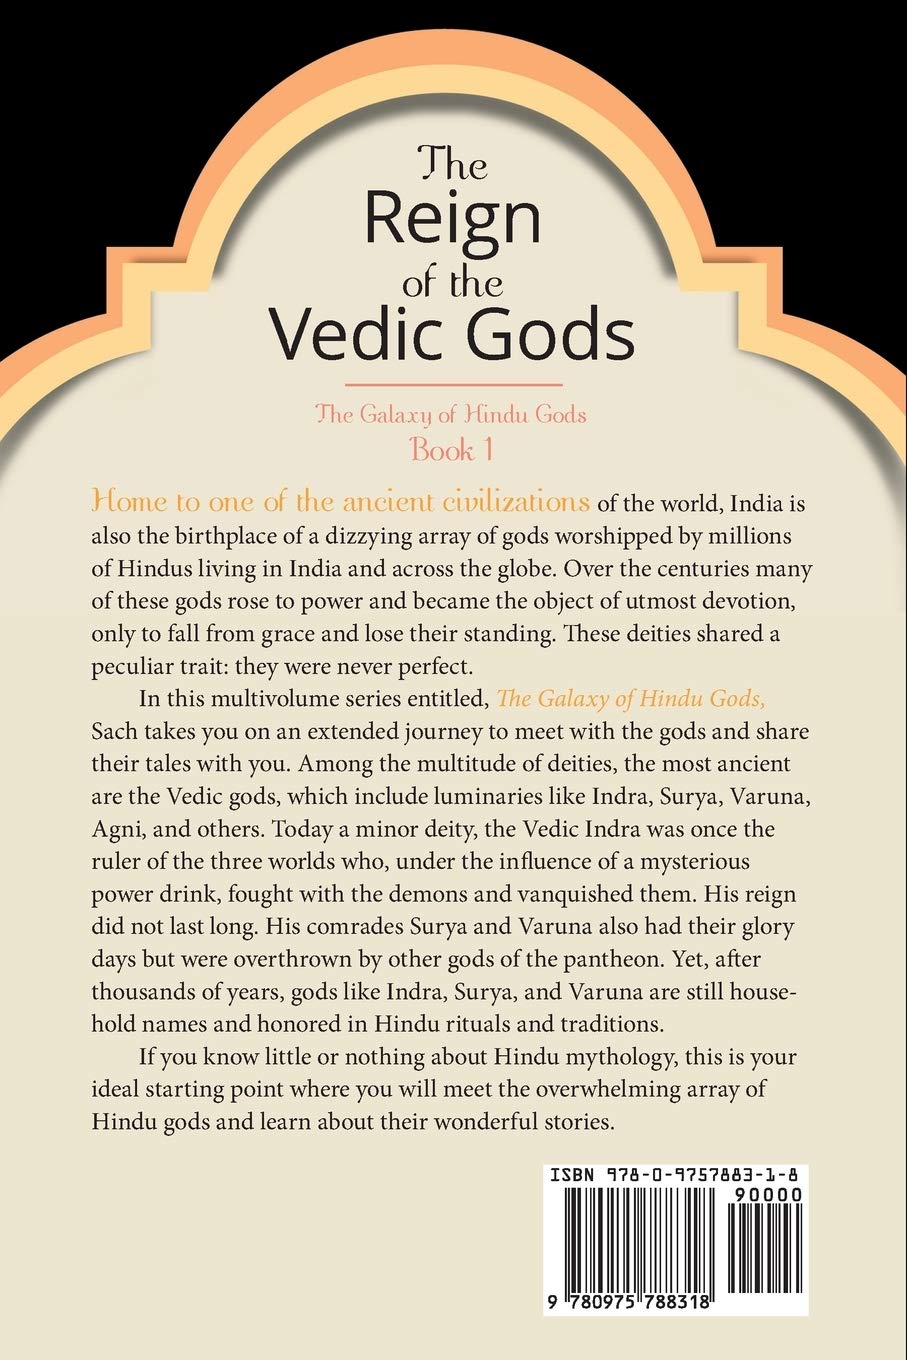 The Reign of the Vedic Gods (The Galaxy of Hindu Gods Book 1)